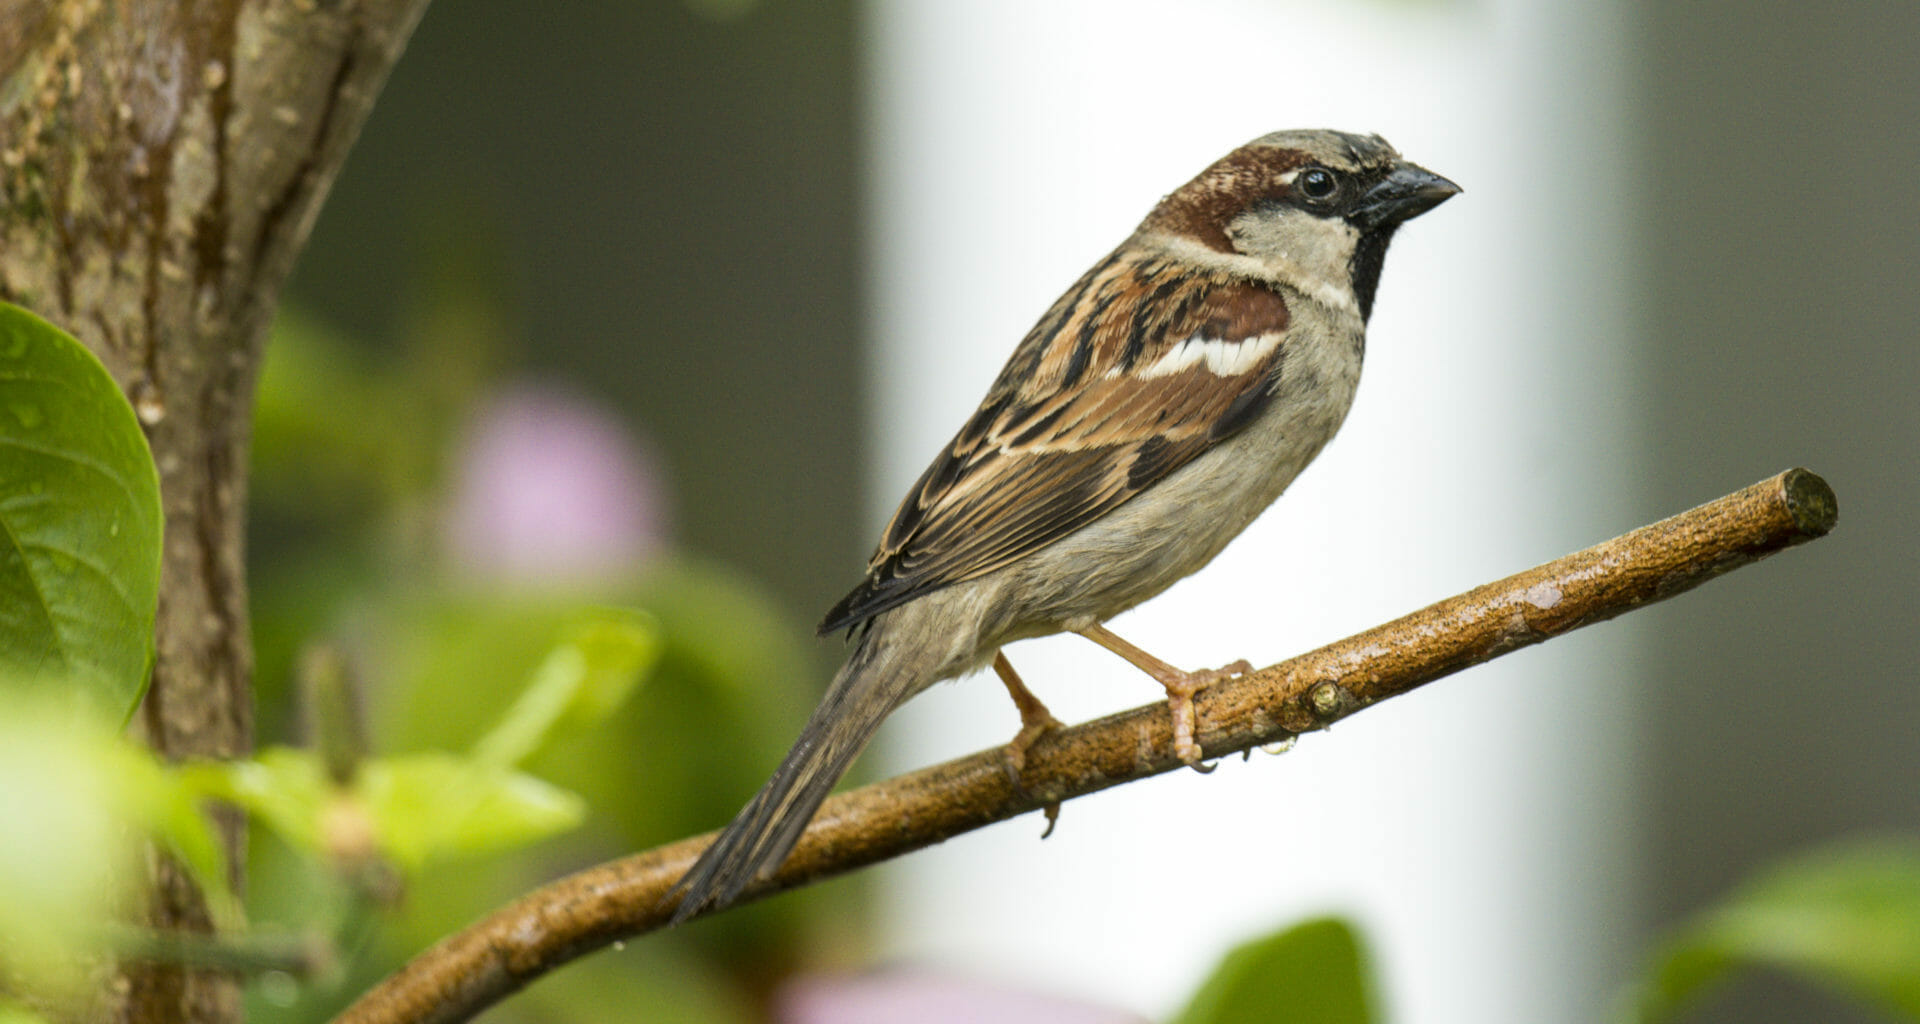 Animal rights groups condemn crude oil experiments on sparrows 3